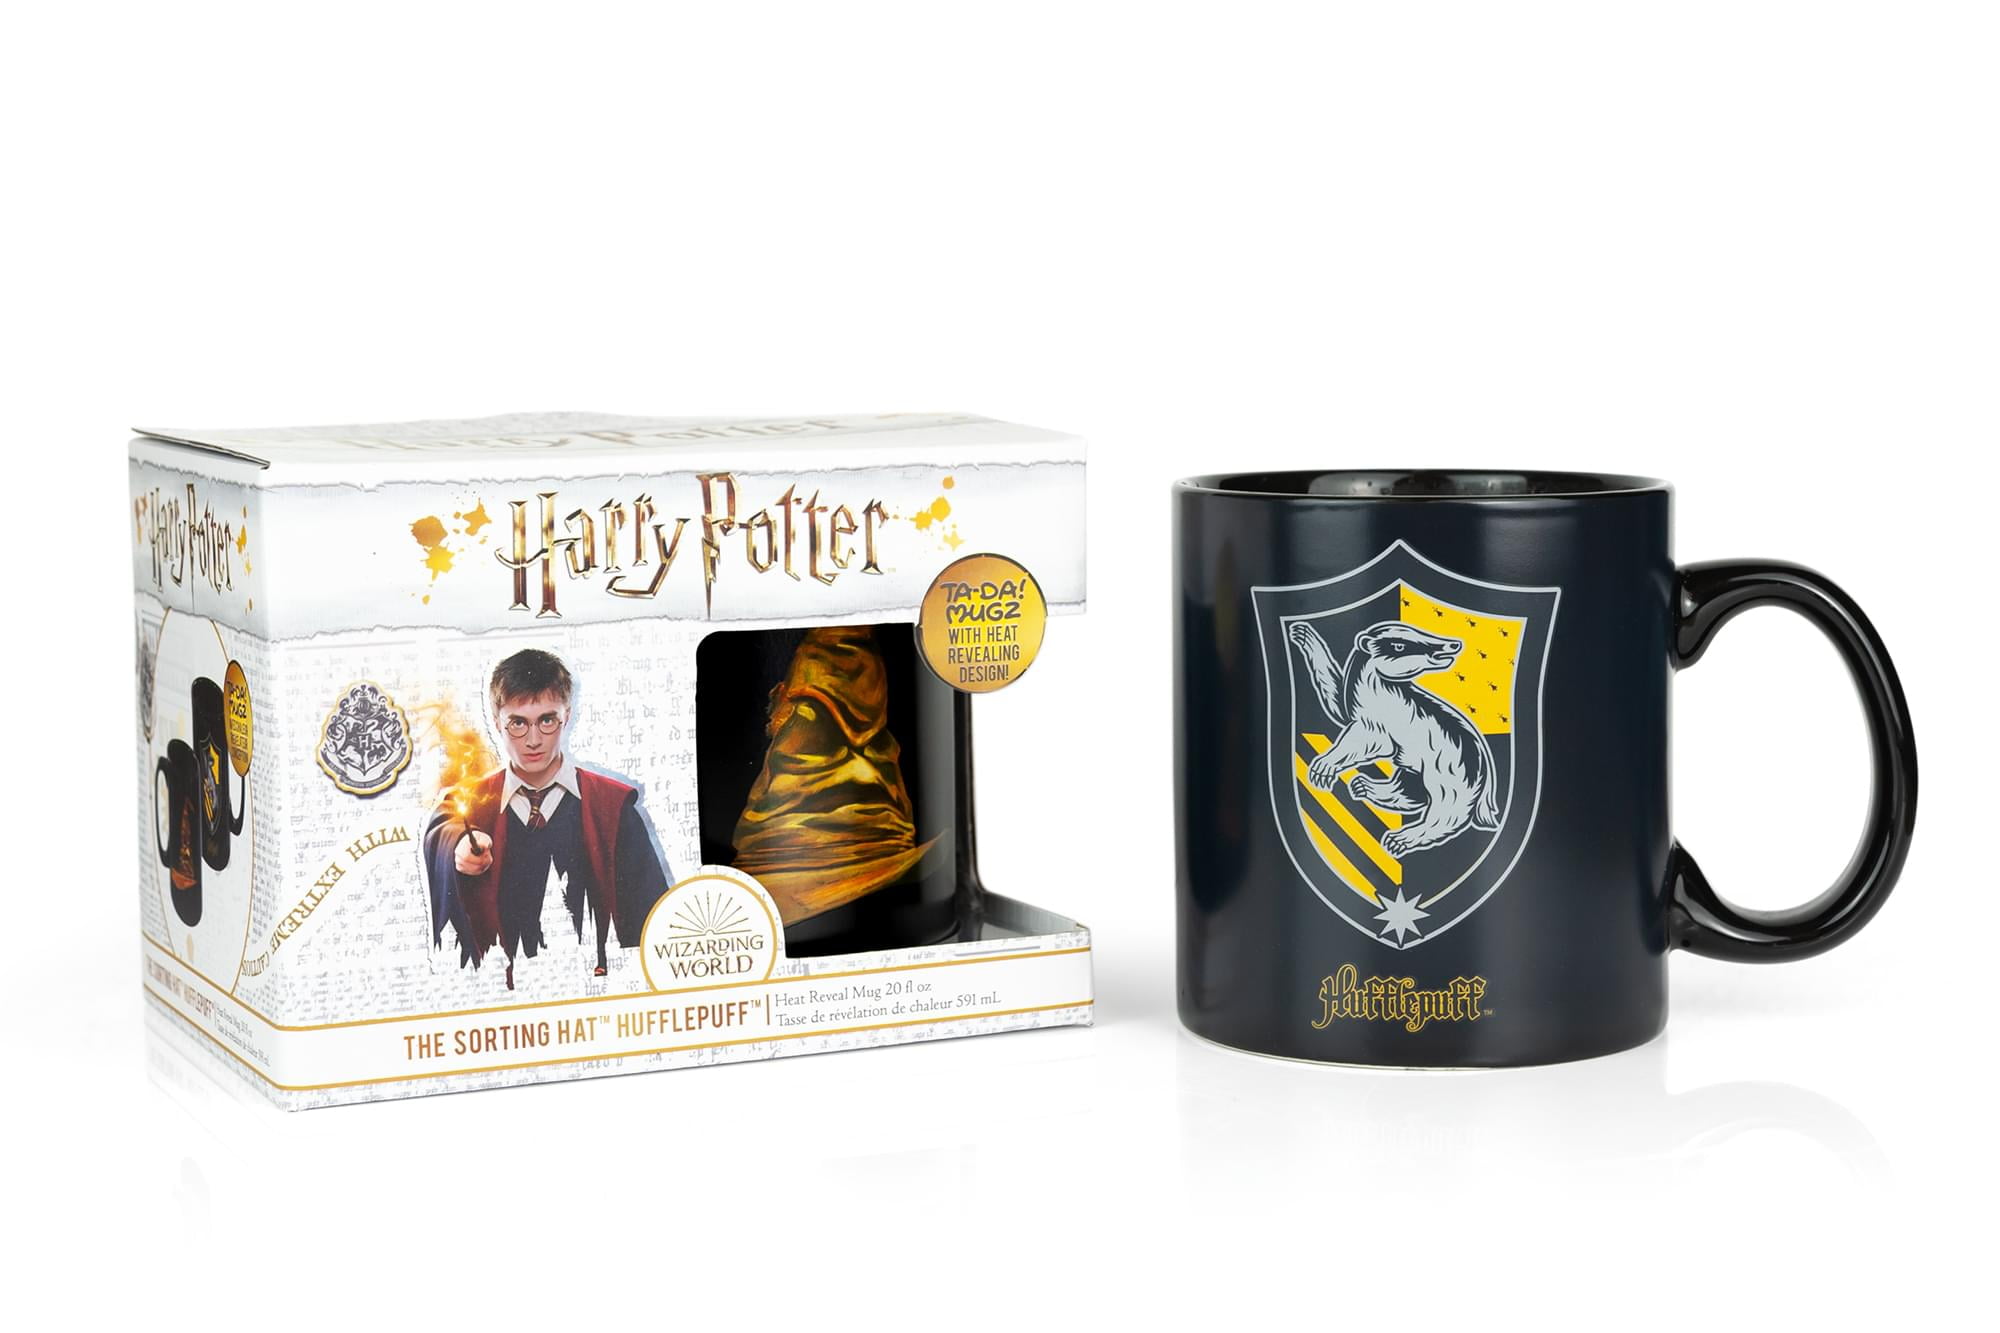 OFFICIAL HARRY POTTER HUFFLEPUFF CREST CAULDRON MUG COFFEE CUP NEW IN GIFT BOX 